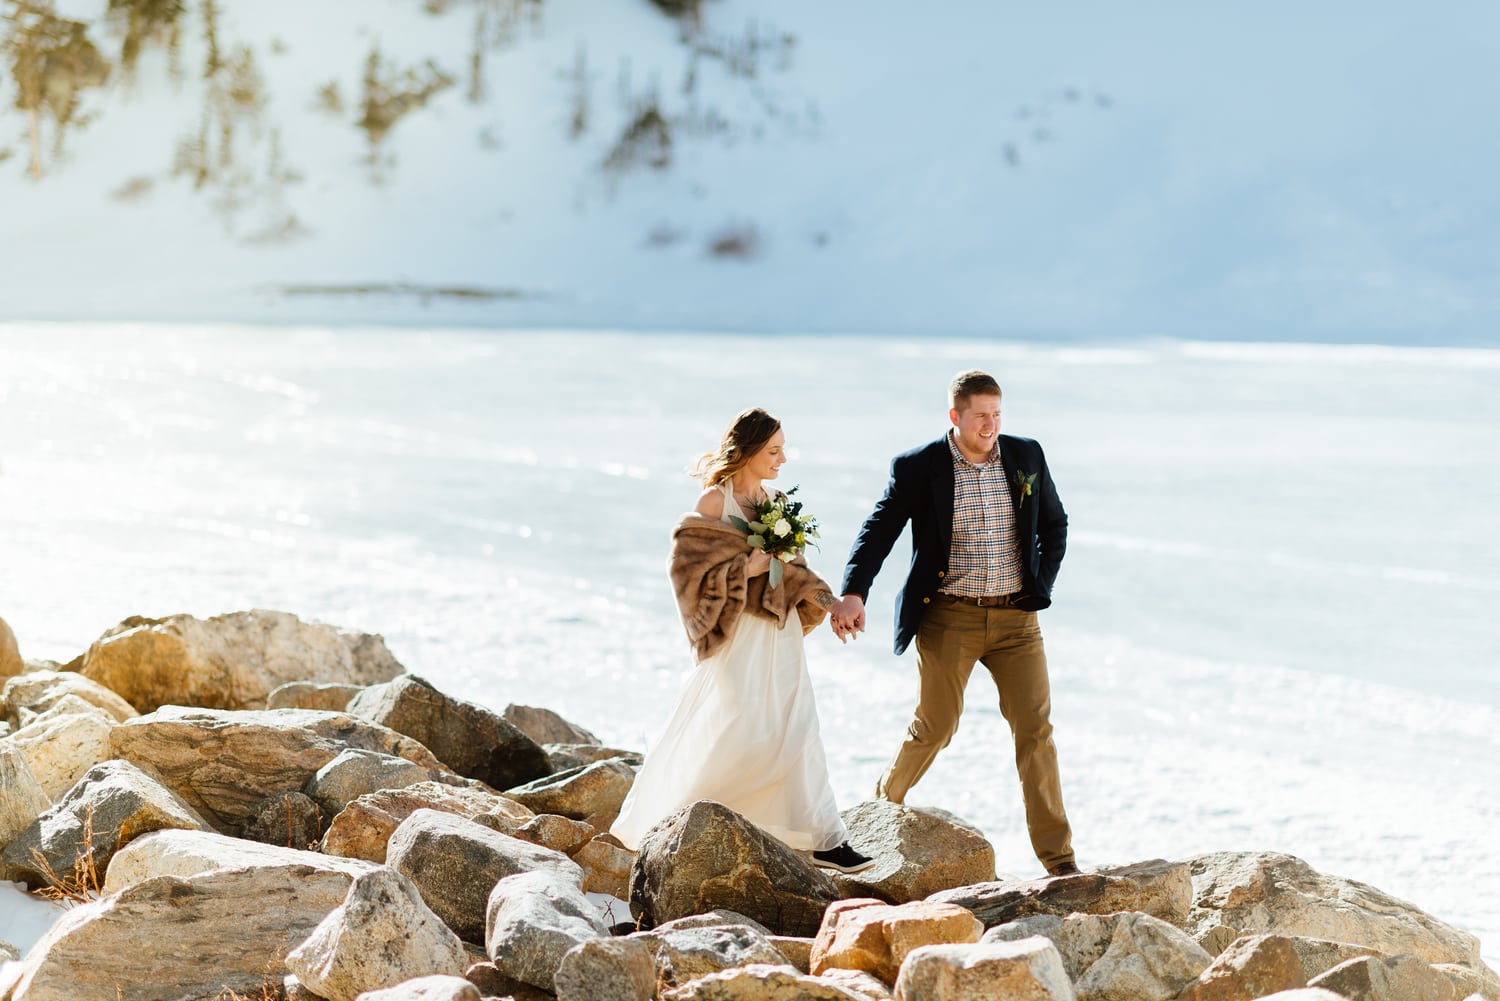 Bride and groom hold hands and walk across rocks, with snow covering the ground behind them at St. Mary's Glacier in Idaho Springs, Colorado. 